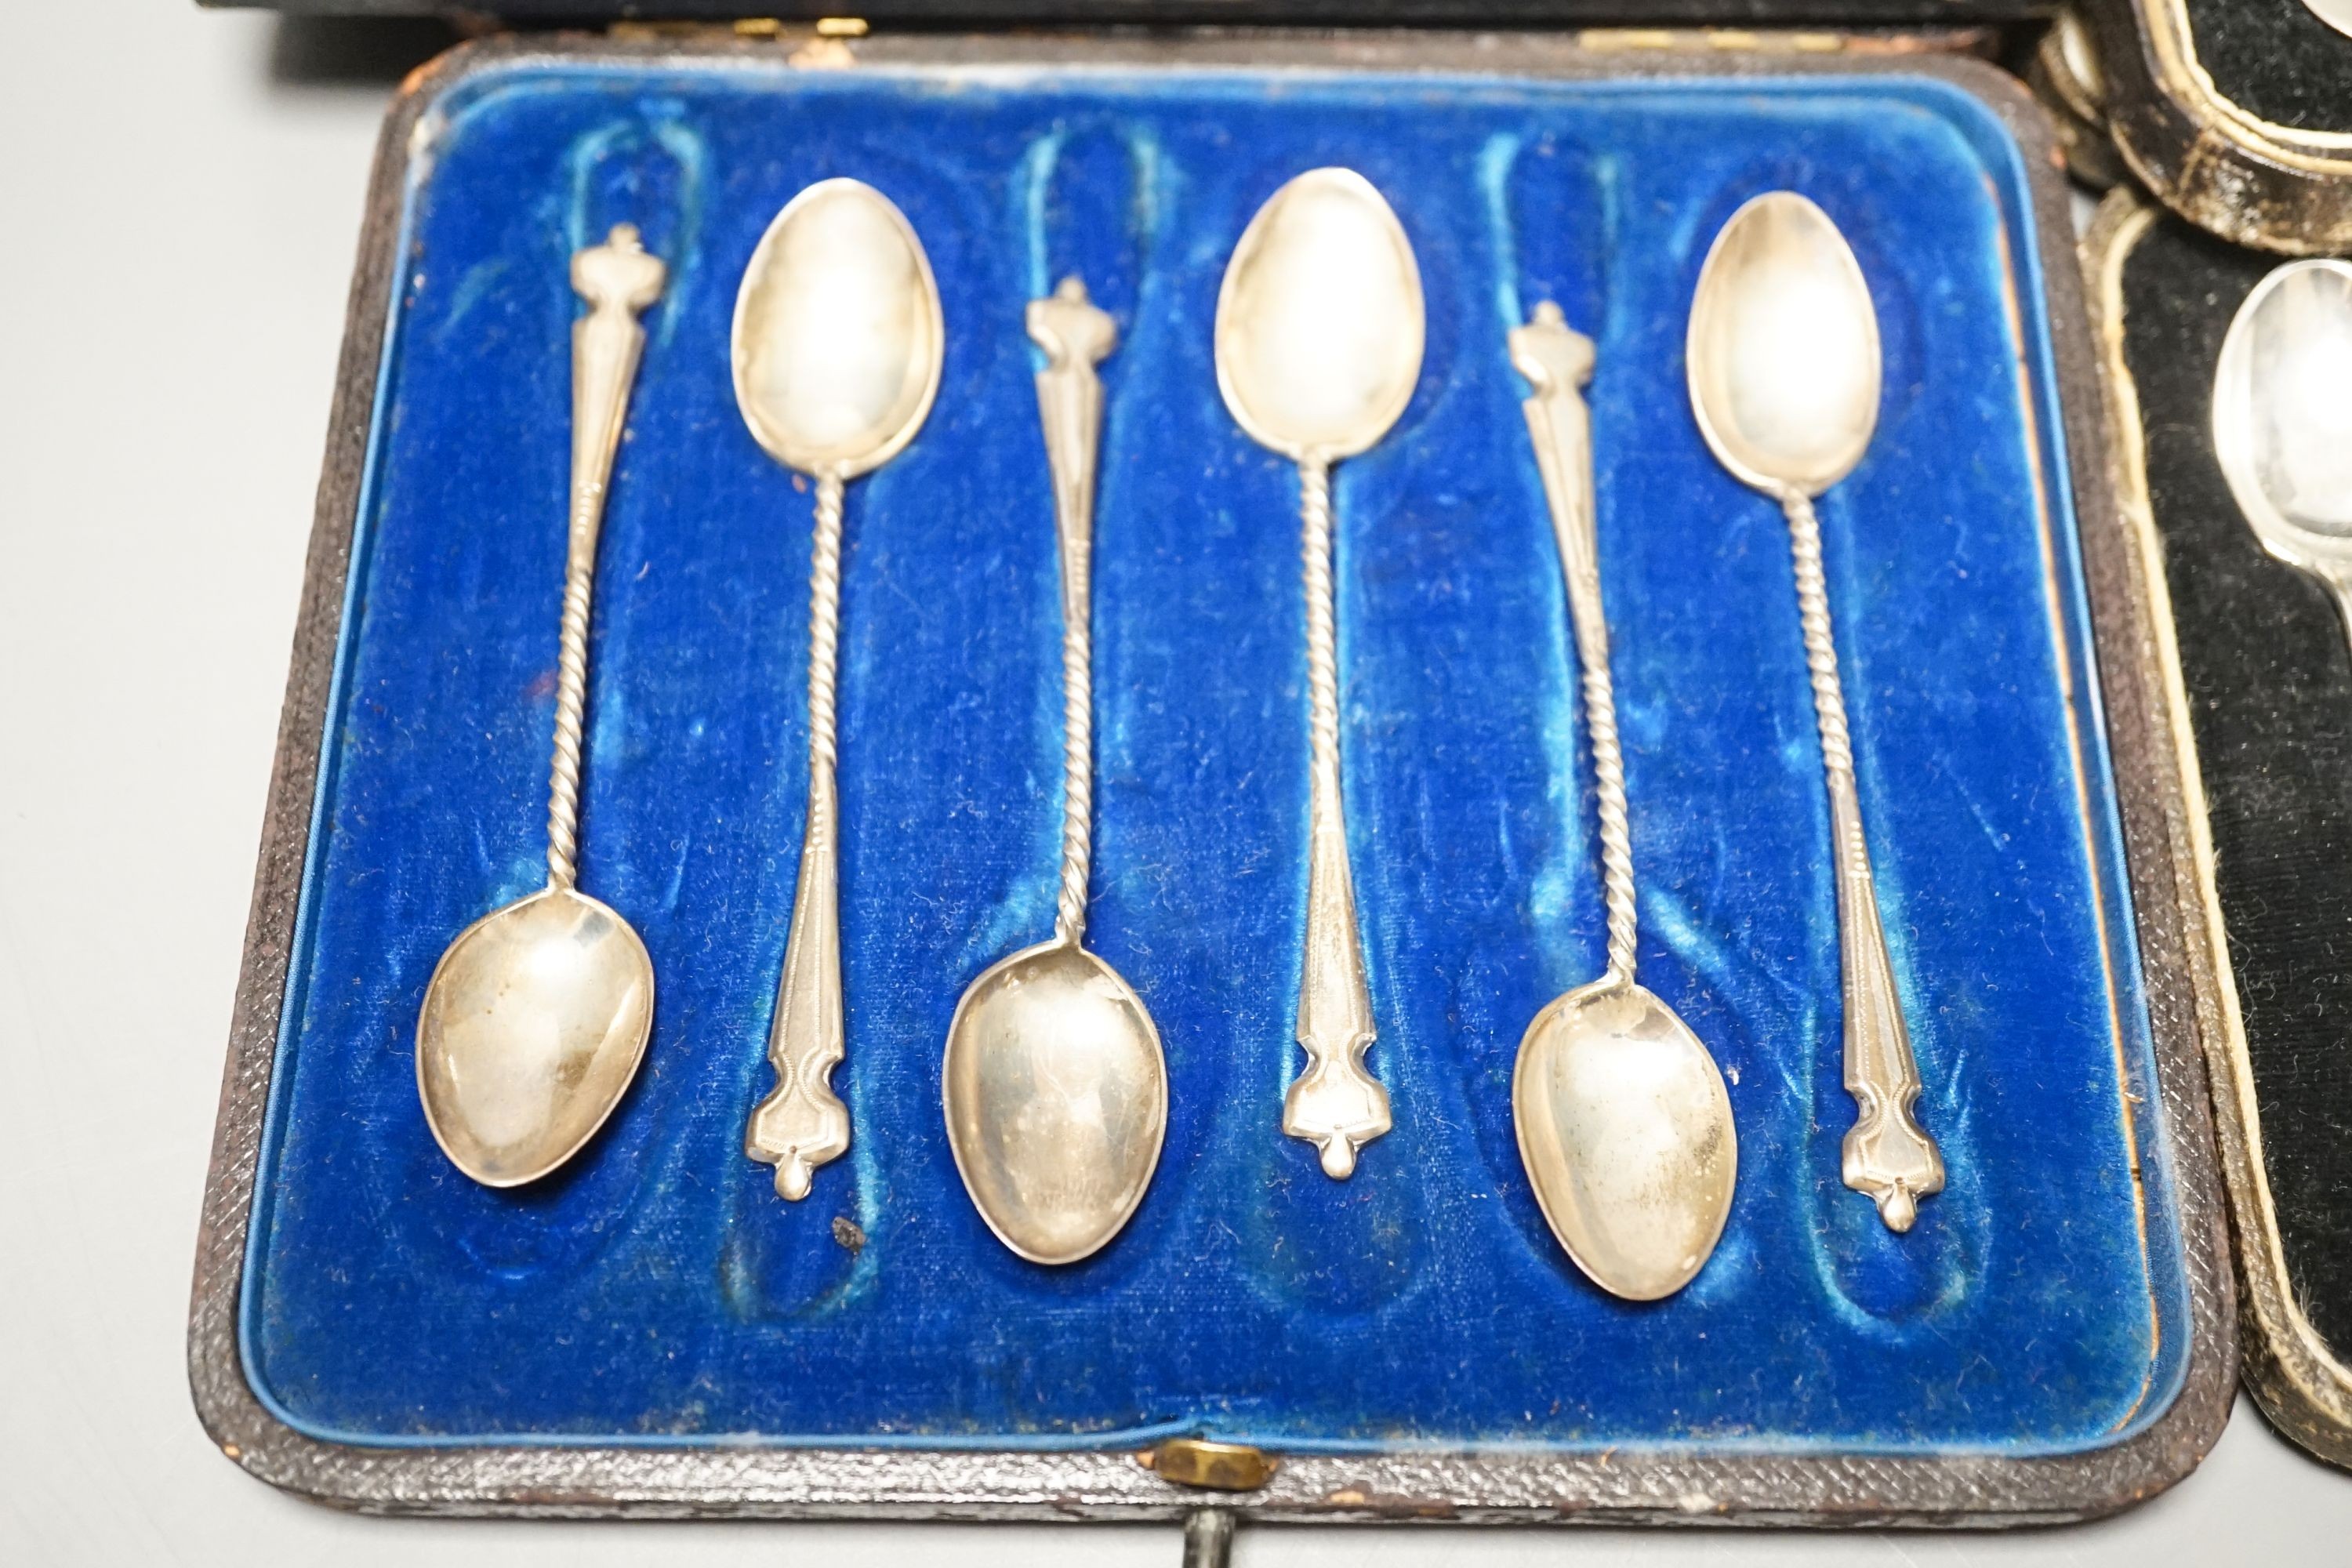 Four cased sets of cutlery including silver teaspoons and pair of silver preserve spoons and a silver cigarette case.